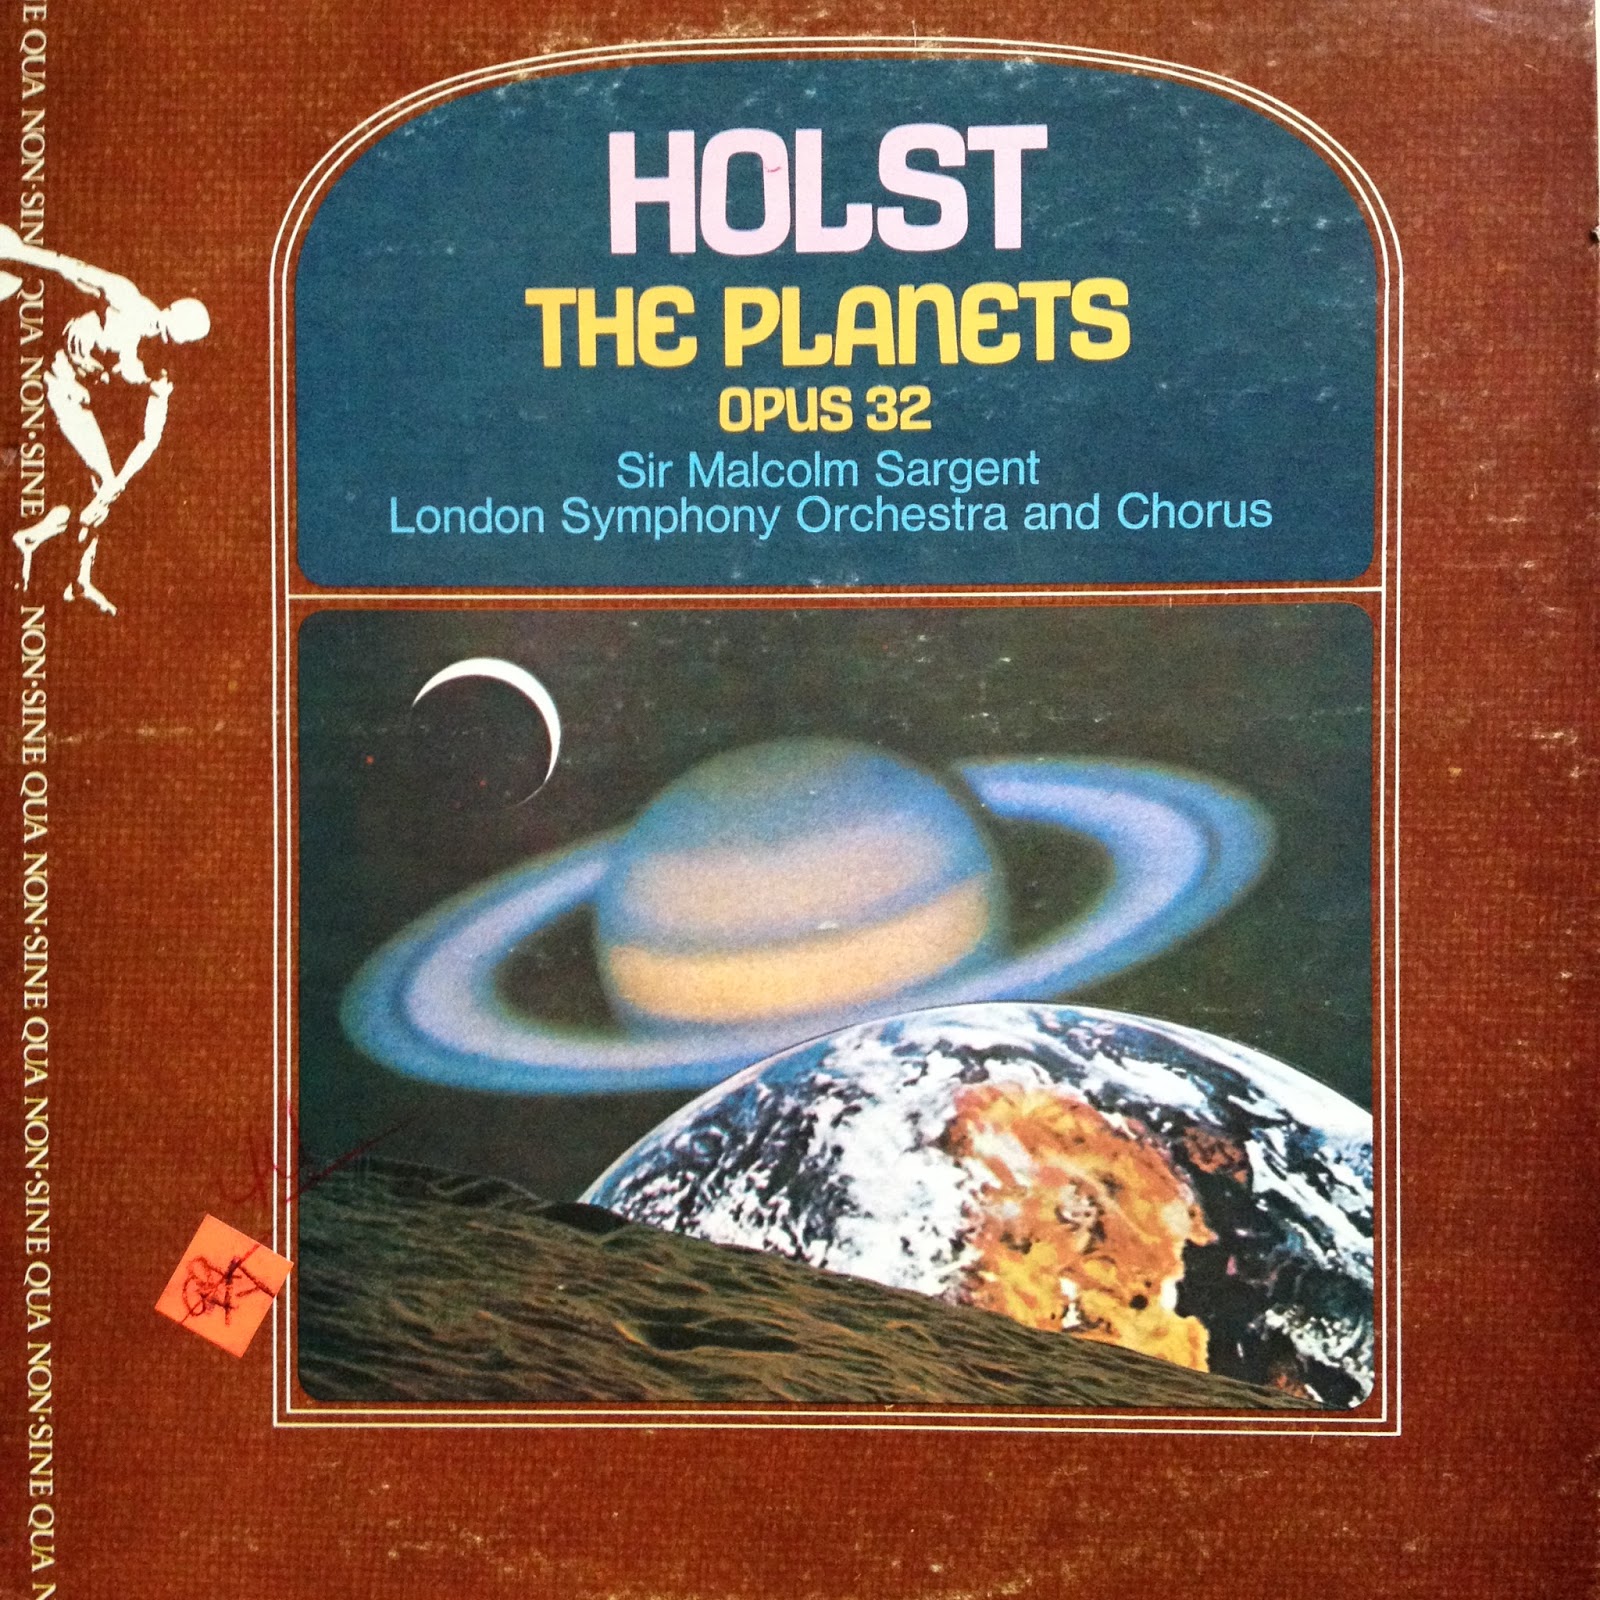 LP:  Holst's Opus 32, The Planets